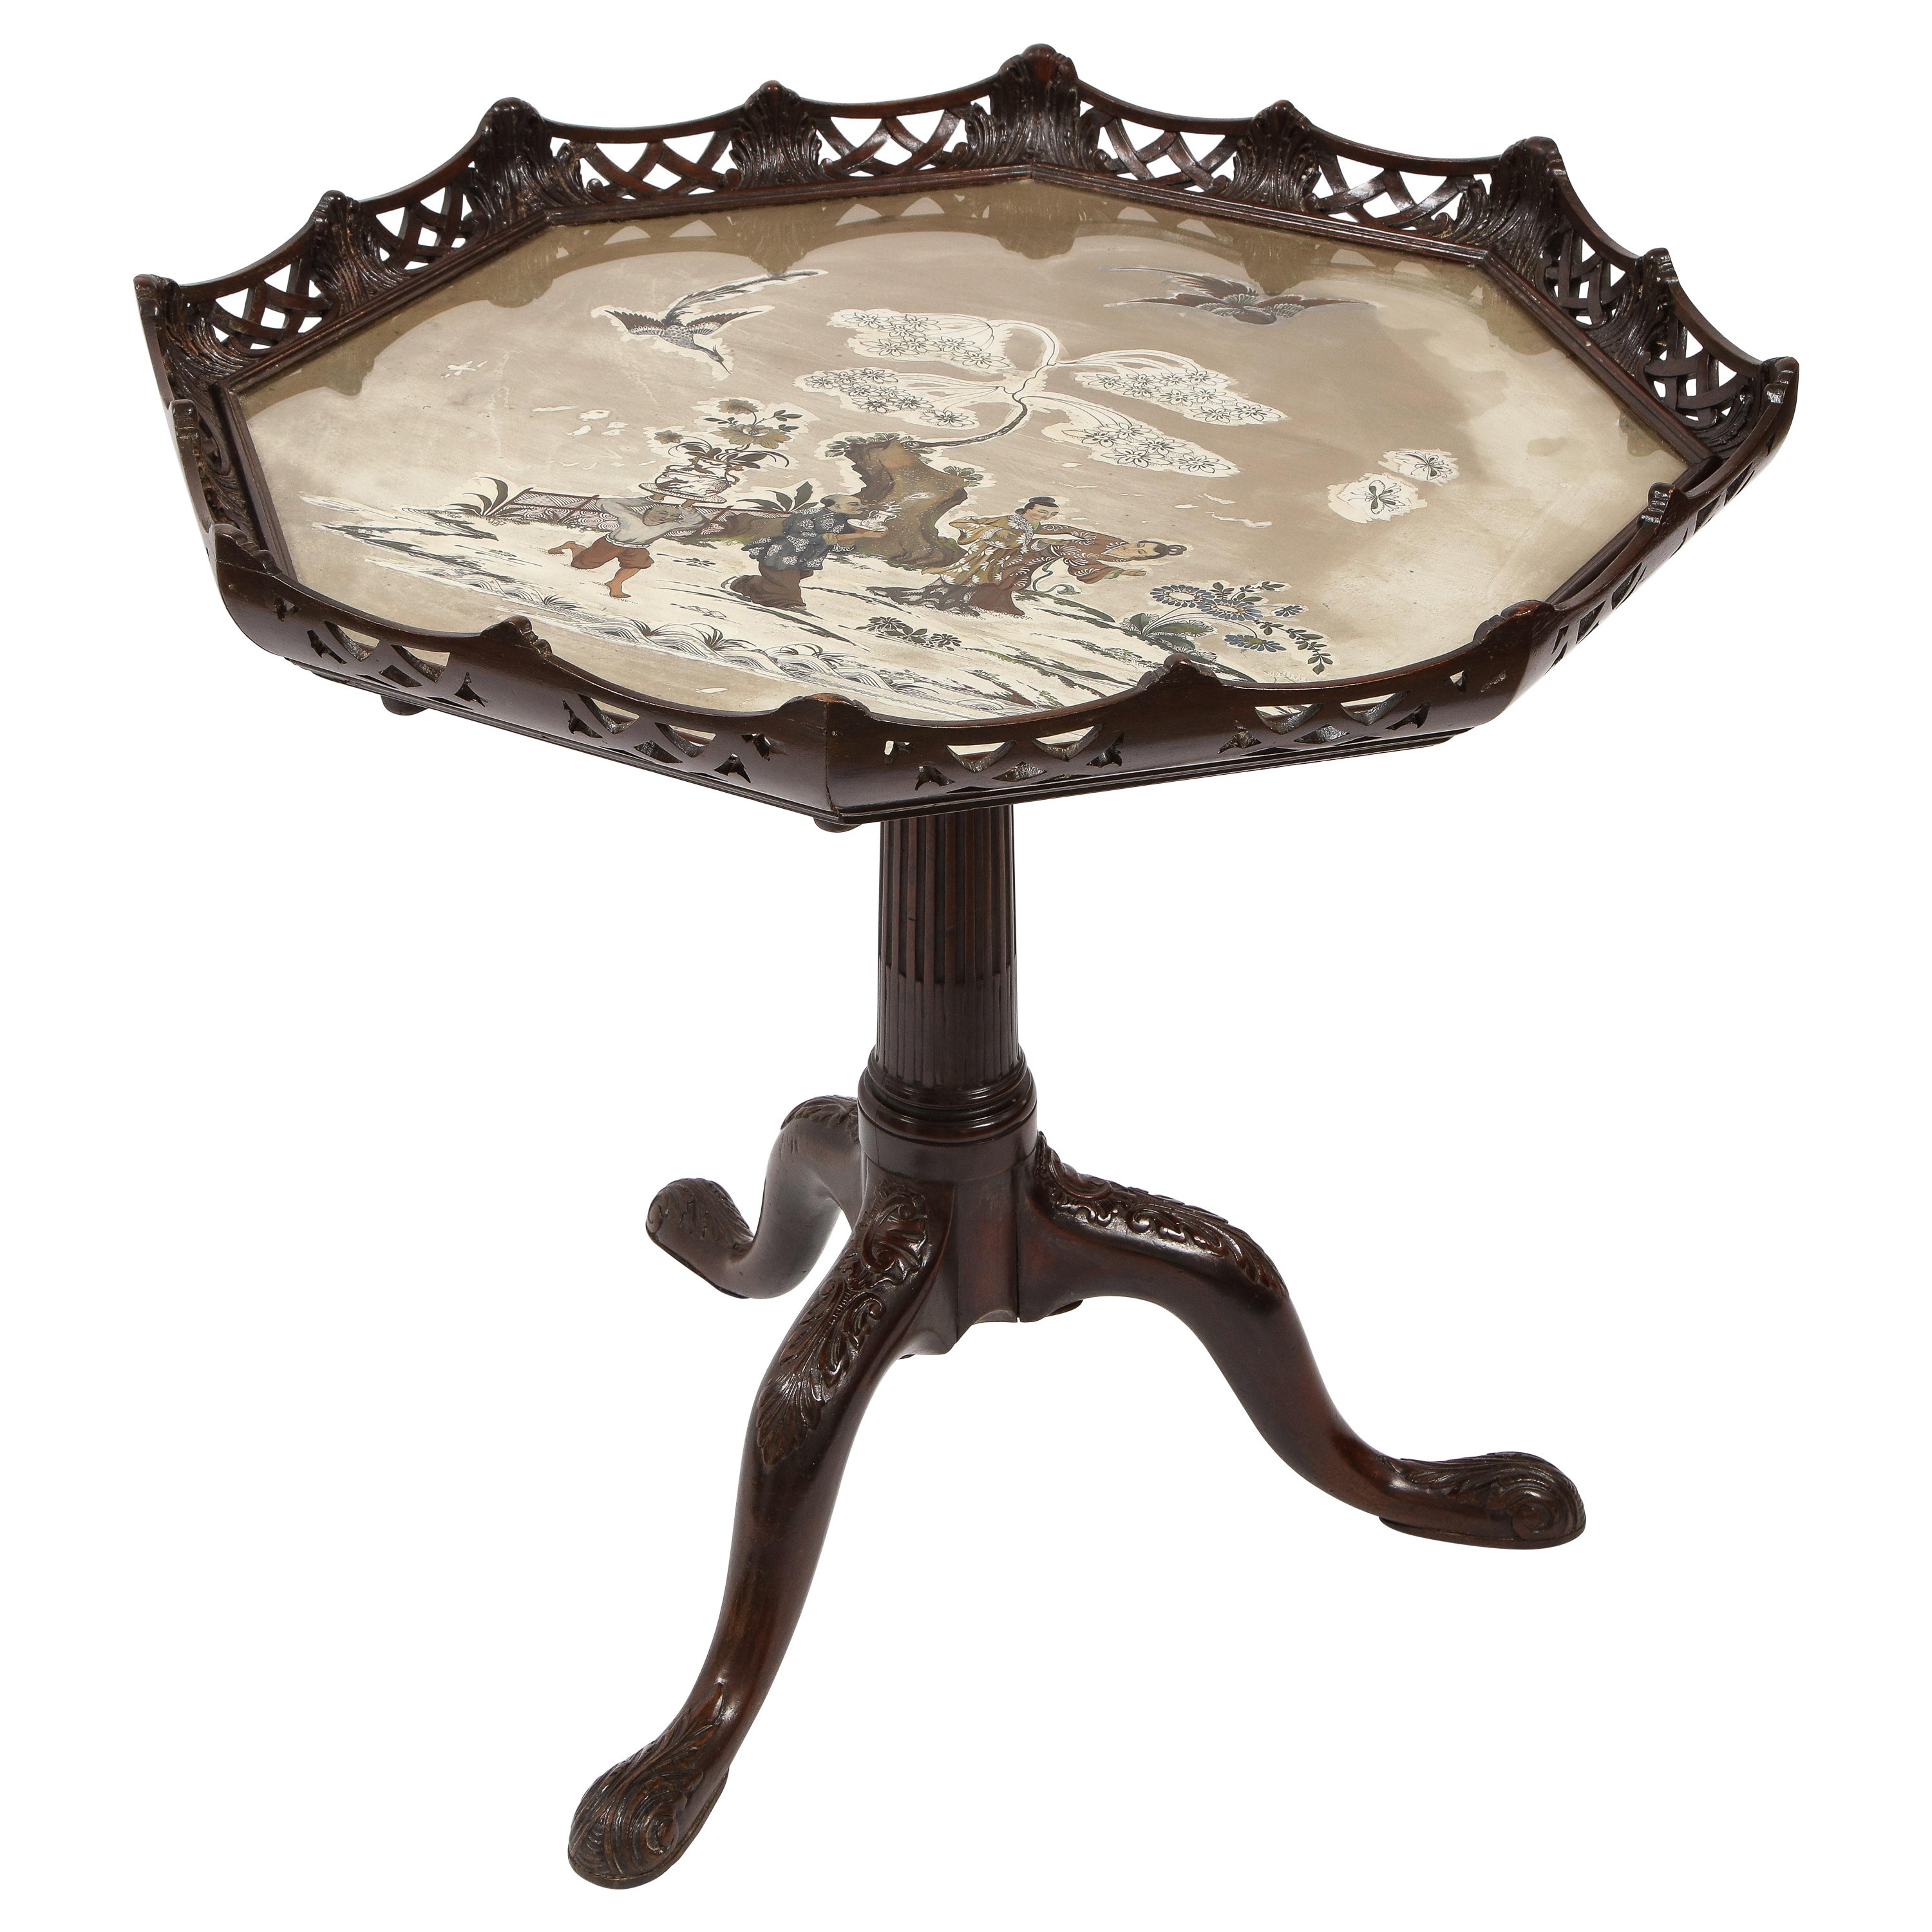 English 19th C. Octagonal Tilt-Top Table w/ Chinoiseries Reverse on Glass Top For Sale